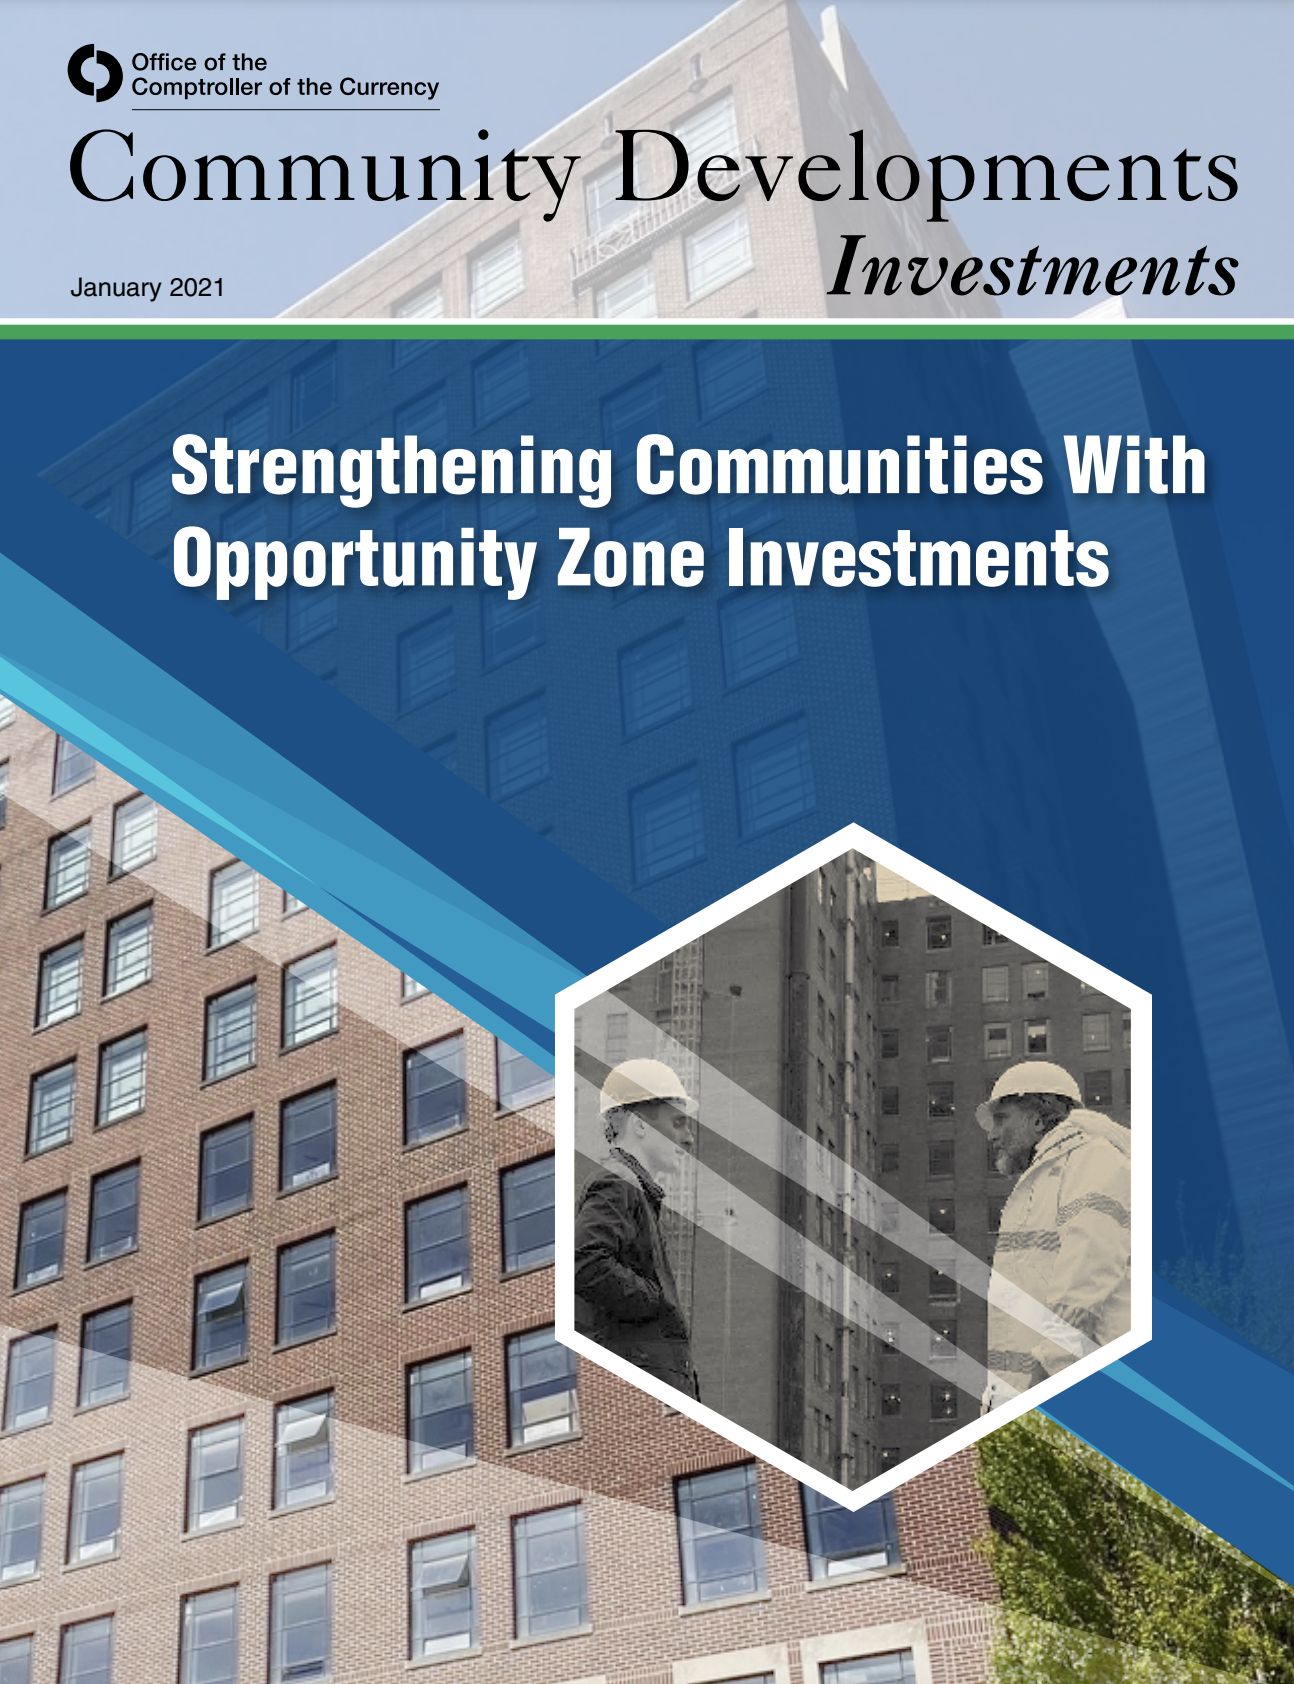 Office of the Comptroller of the Currency. Community Developments Investments. January 2021. Strengthening Communities with Opportunity Zone Investments